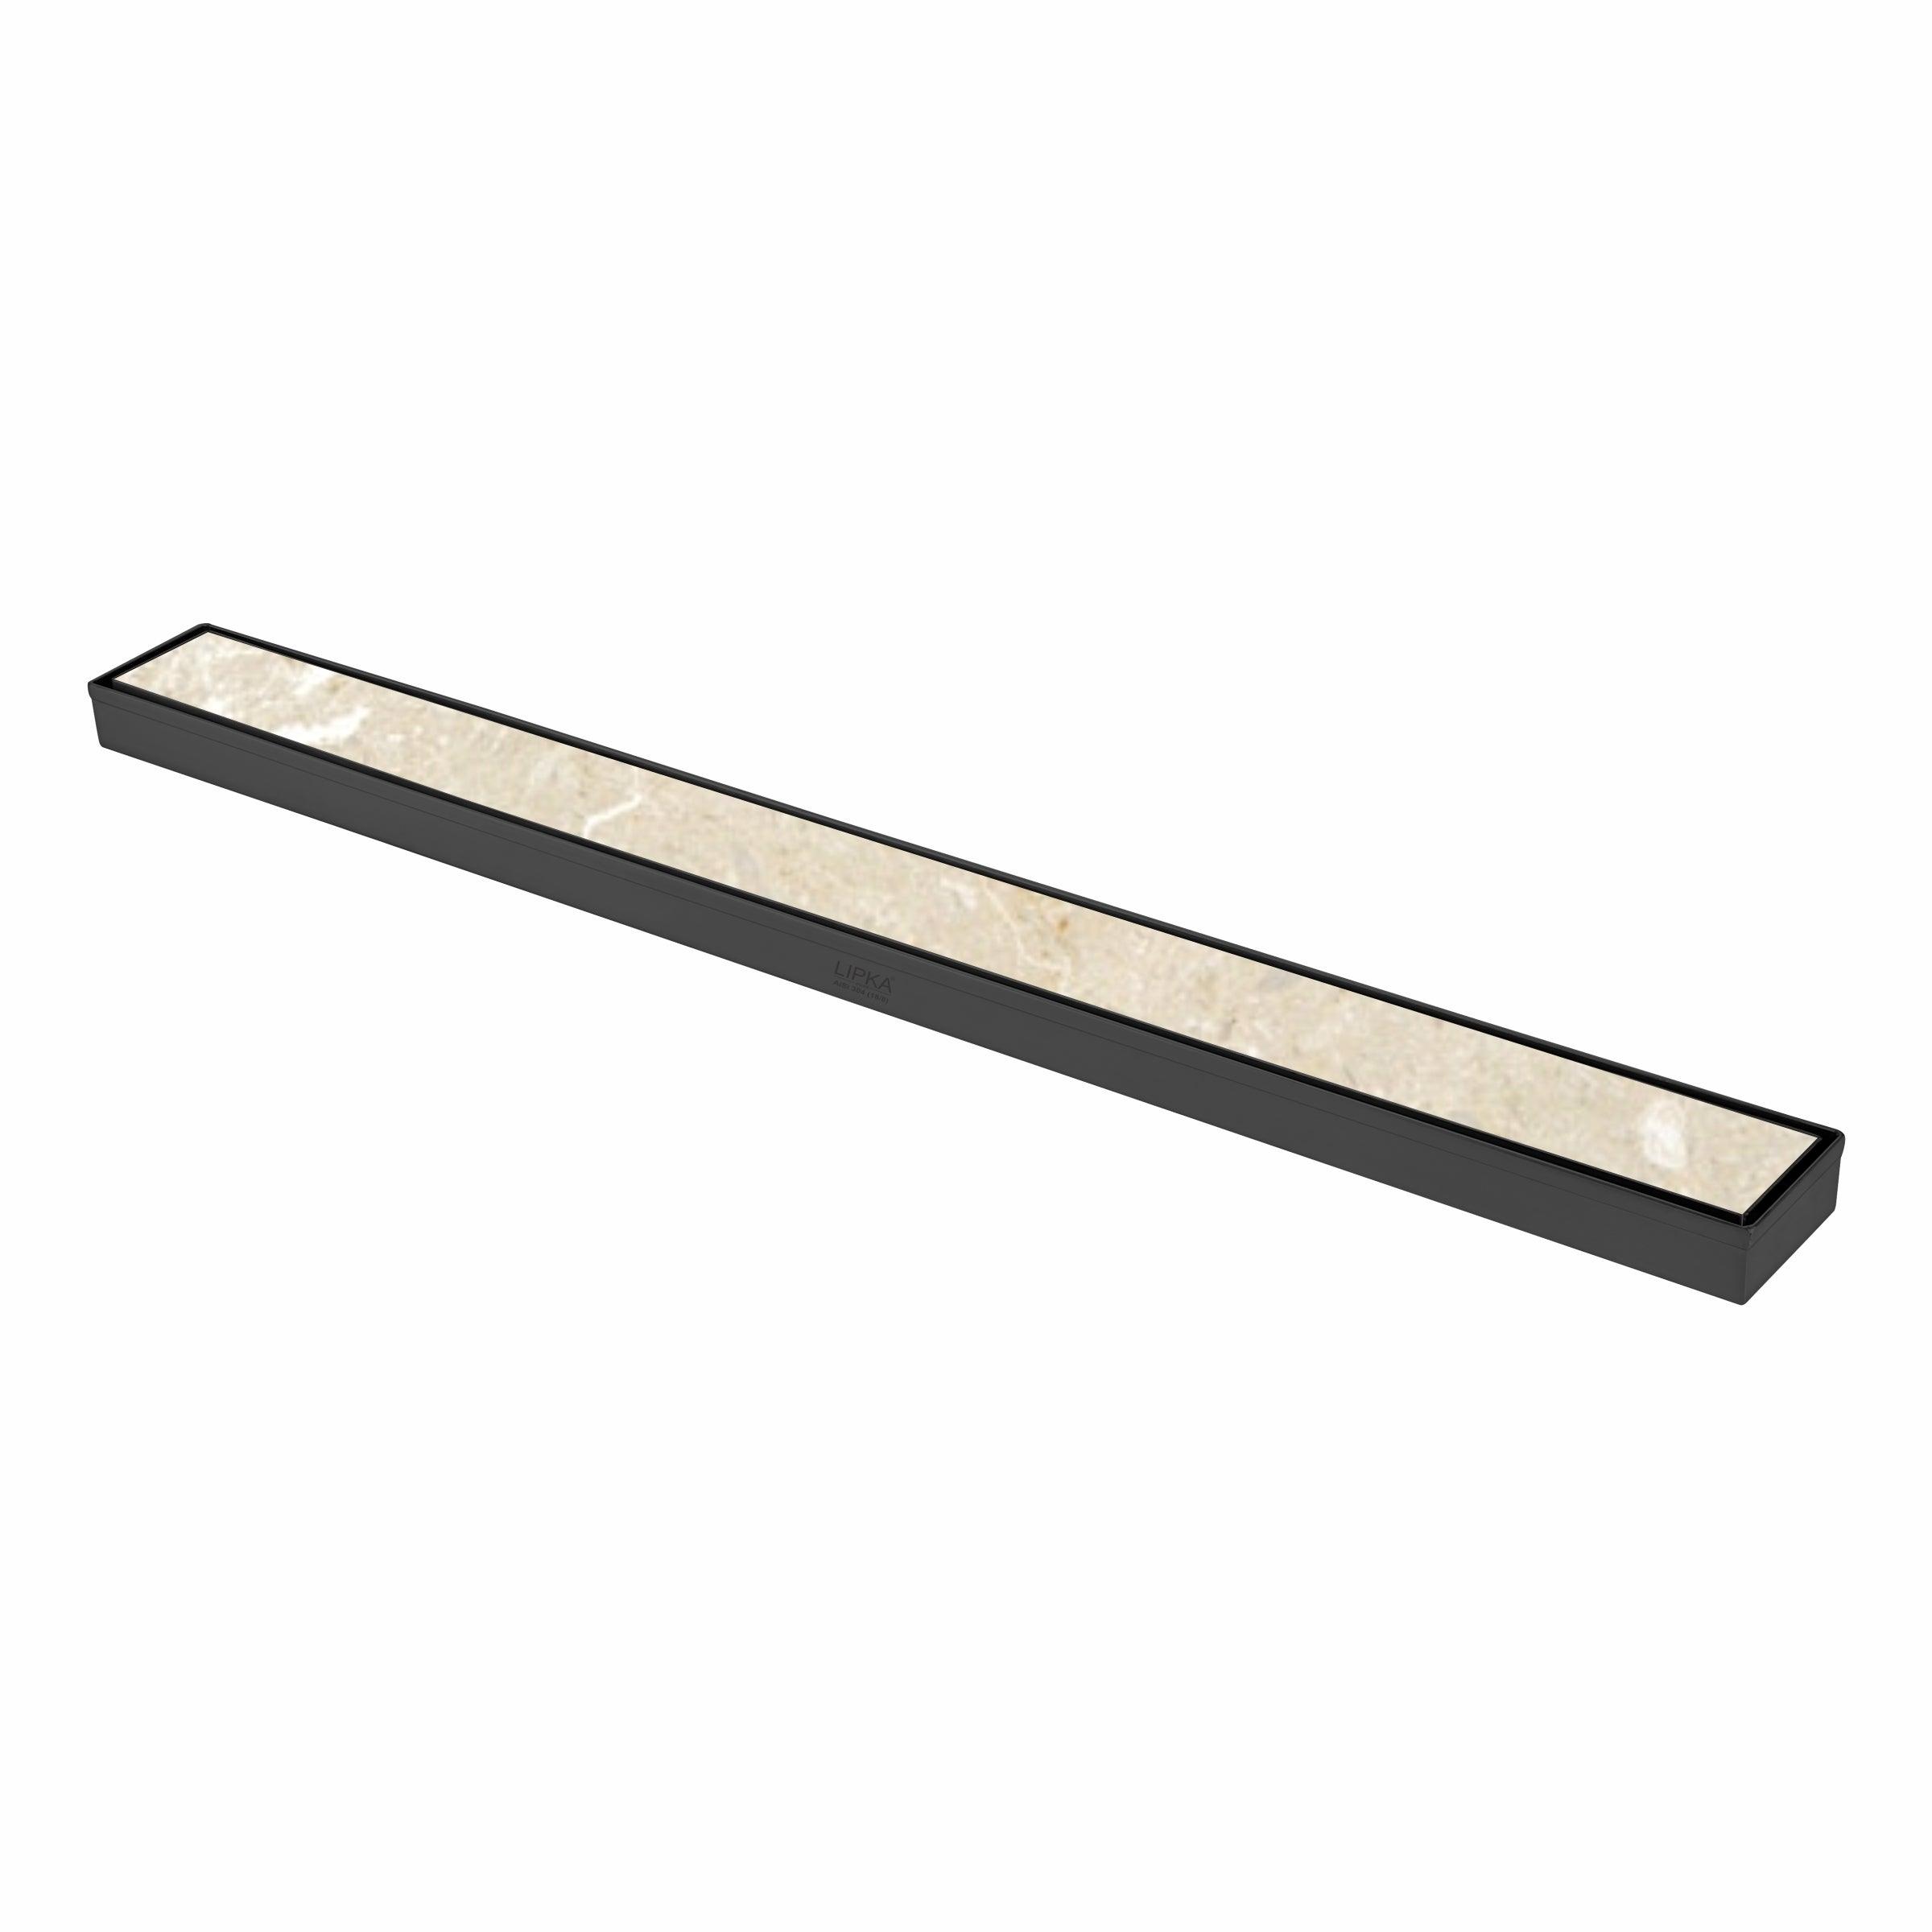 Tile Insert Shower Drain Channel - Black (36 x 2 Inches)